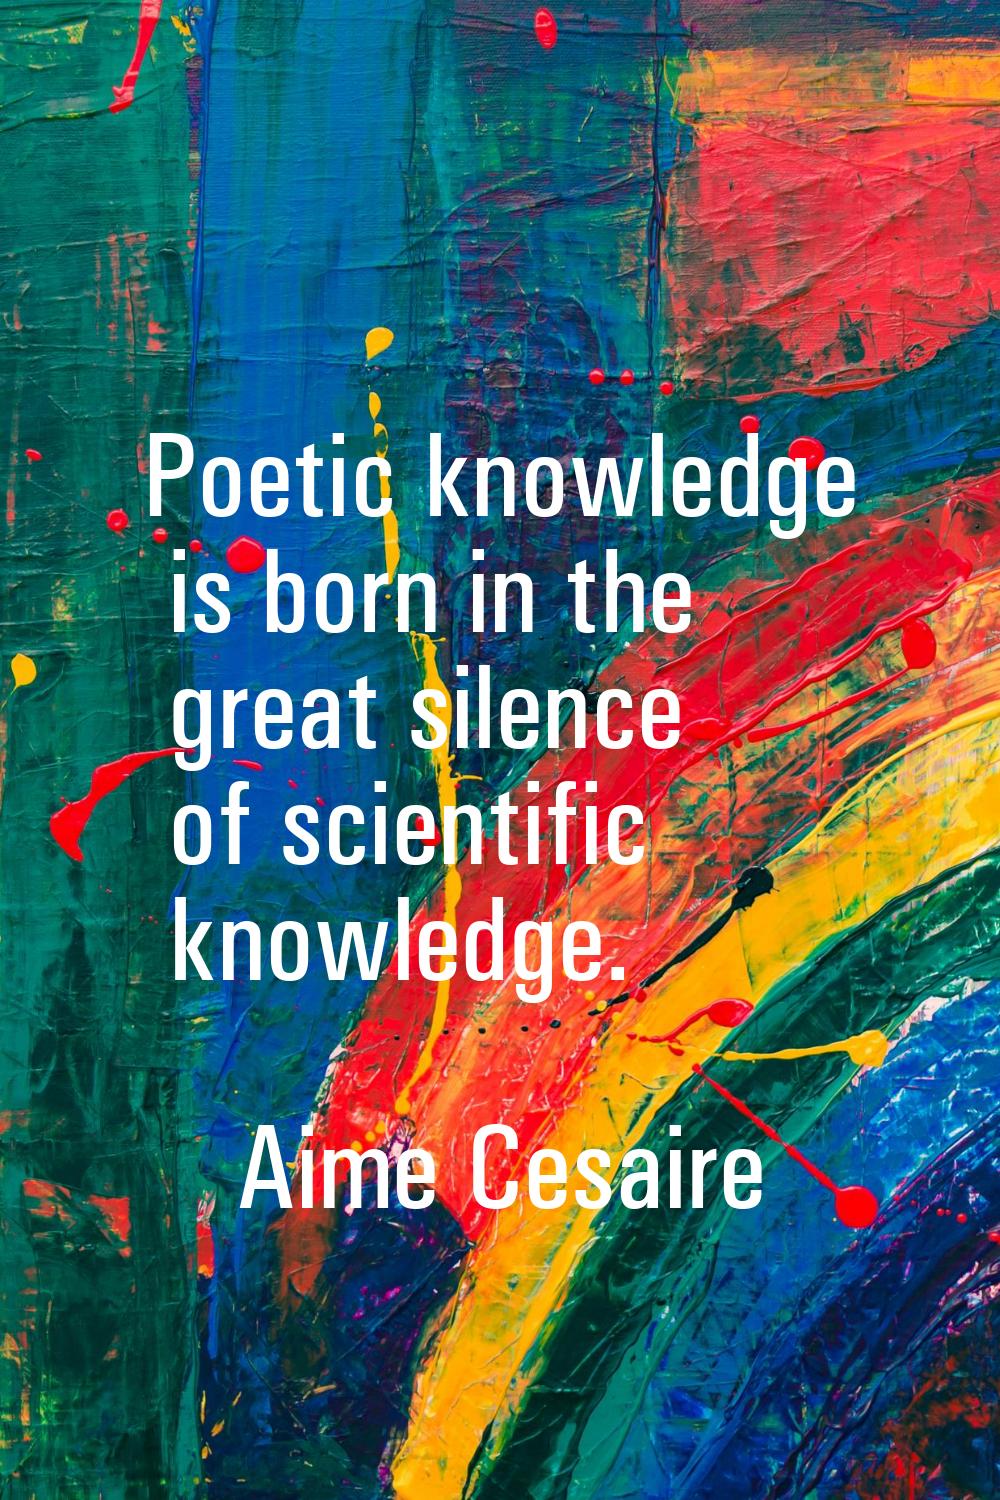 Poetic knowledge is born in the great silence of scientific knowledge.